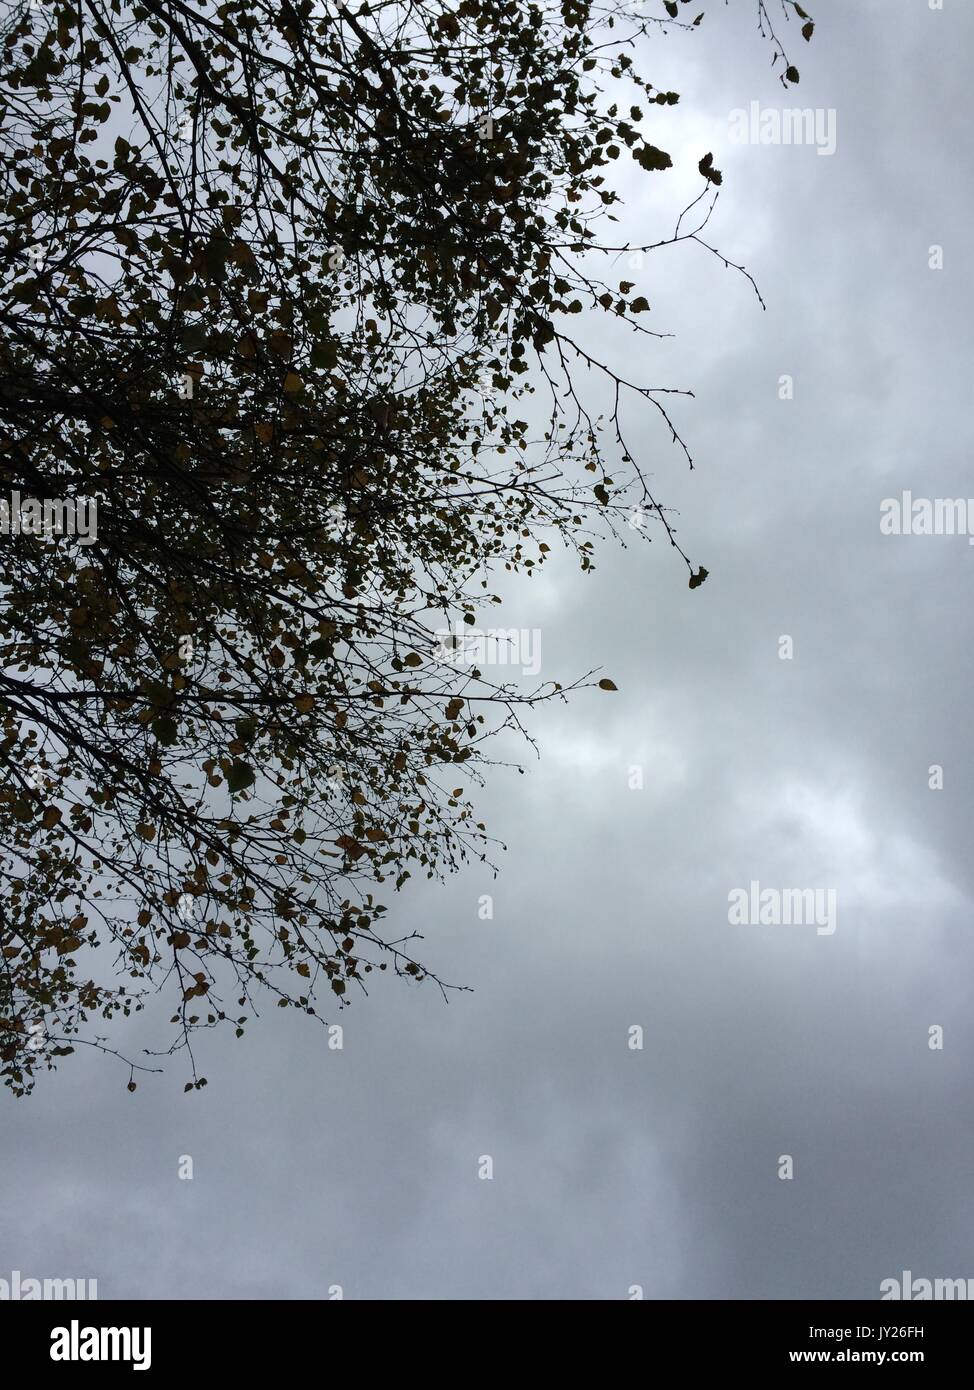 Silhouette of tree branches over dull grey clouds Stock Photo